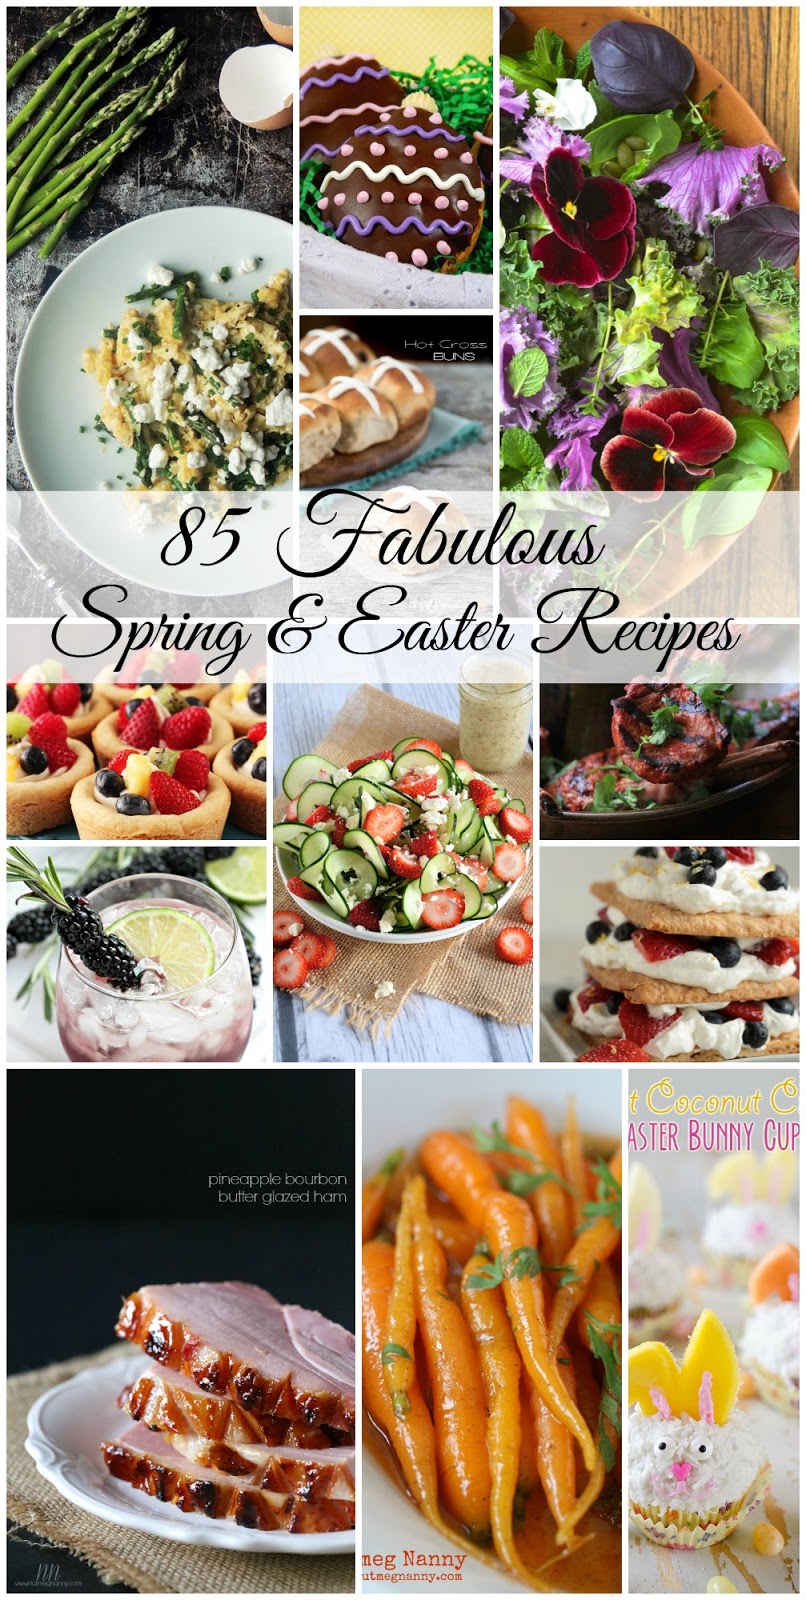 85 Fabulous Spring and Easter Recipes from www.bobbiskozykitchen.com